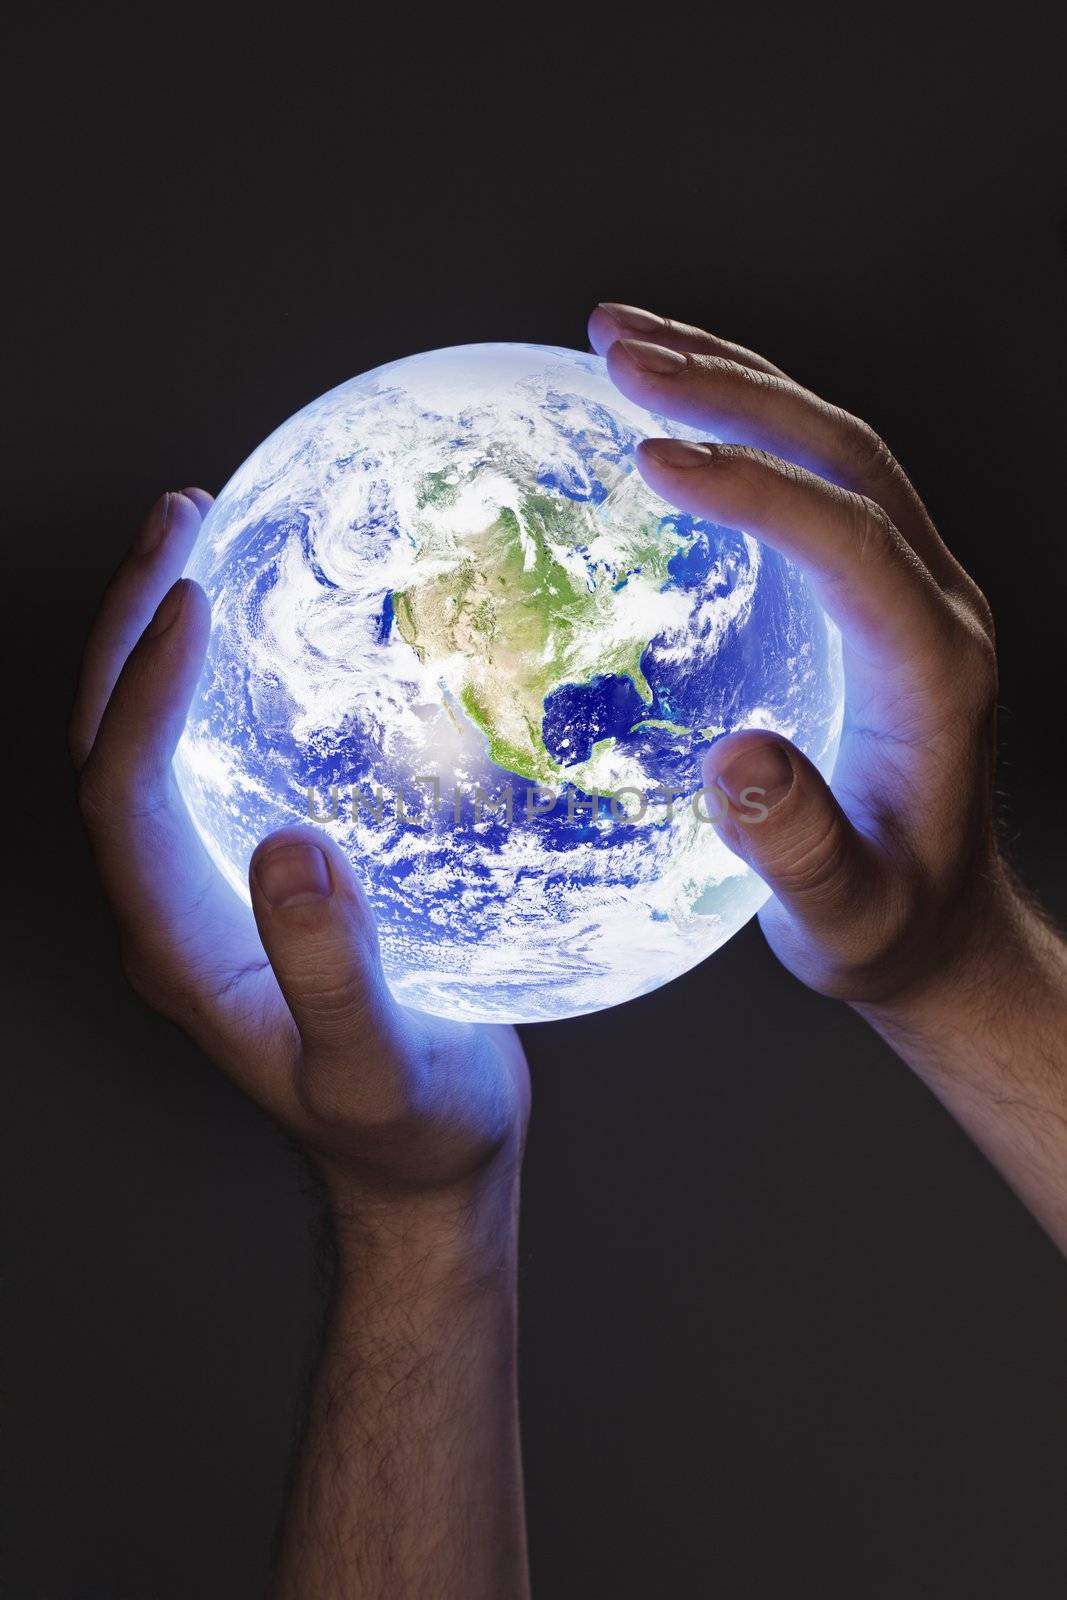 Man holding a glowing earth globe in his hands. Earth image provided by Nasa.